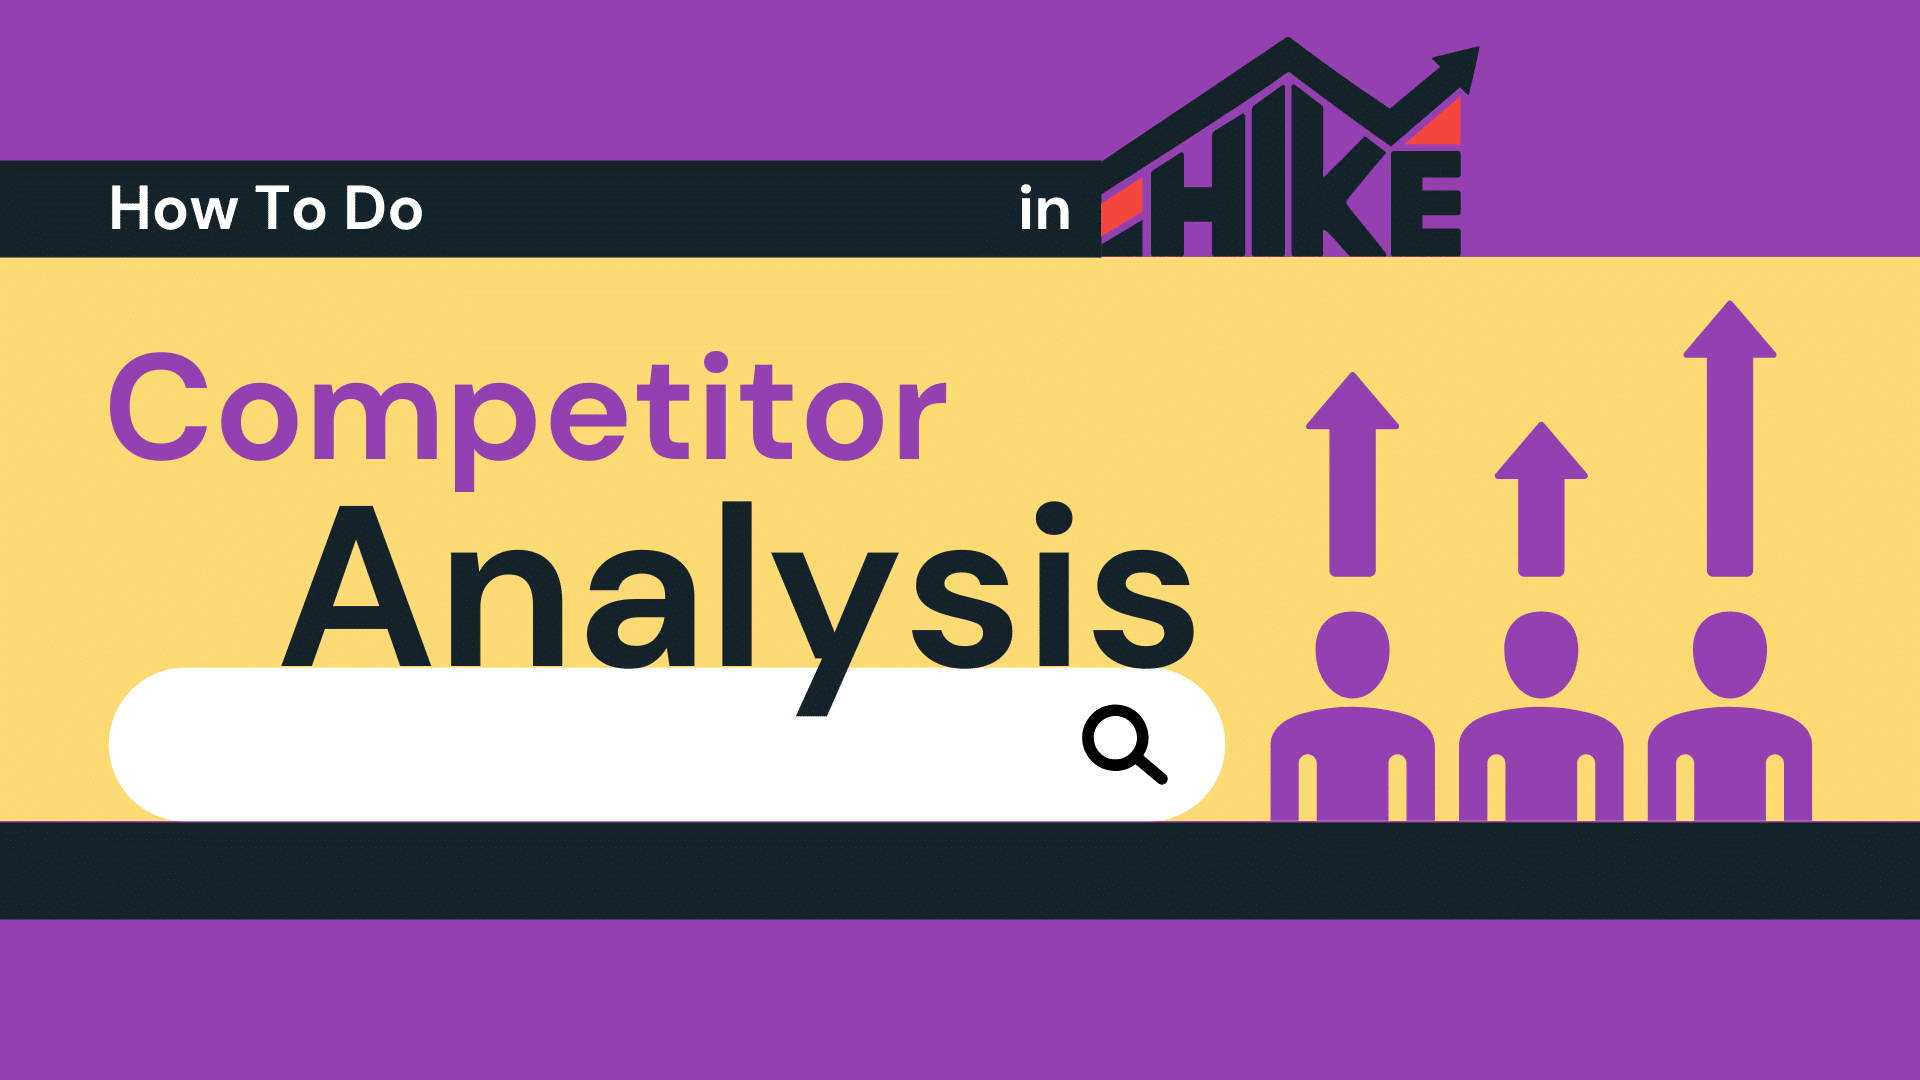 How To Do Competitor Analysis In Hike